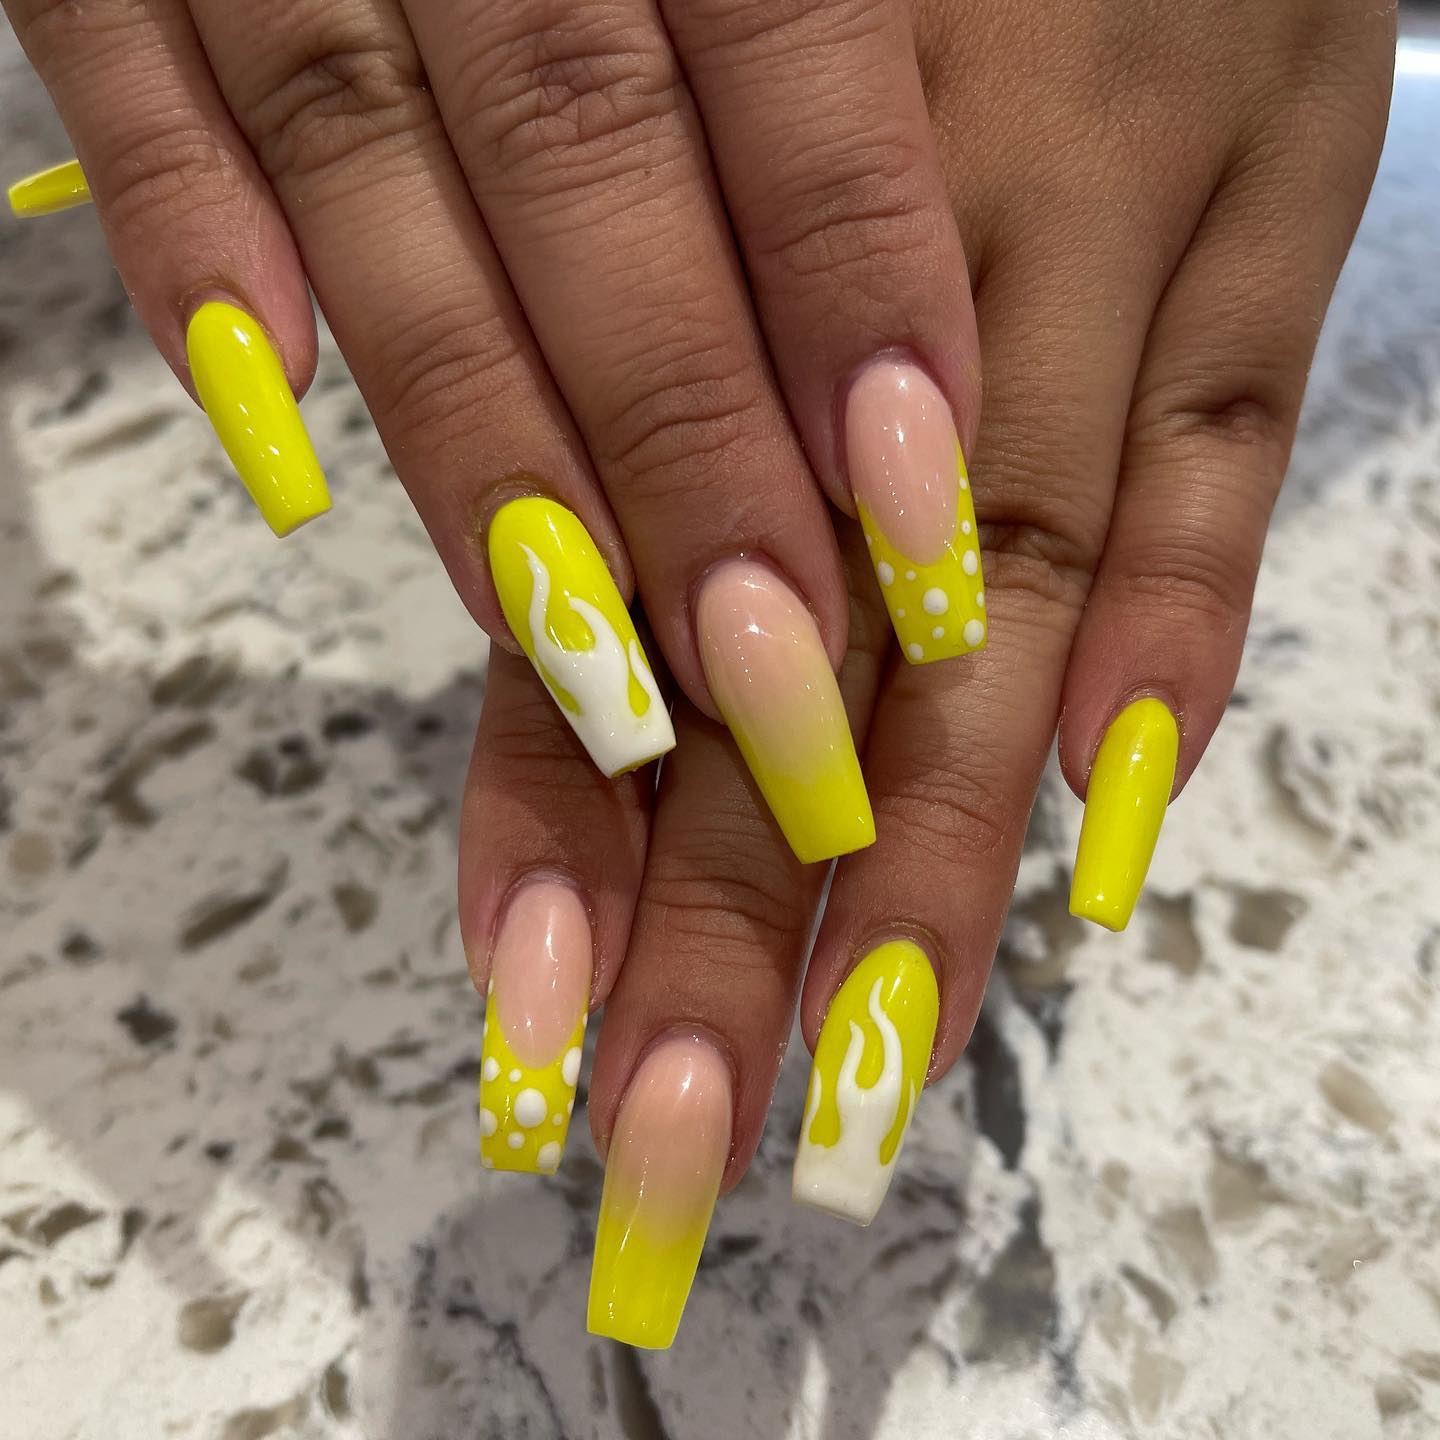 Yellow and long nails will look popping for the summer! Go for these long acrylics and show them off at most party events.